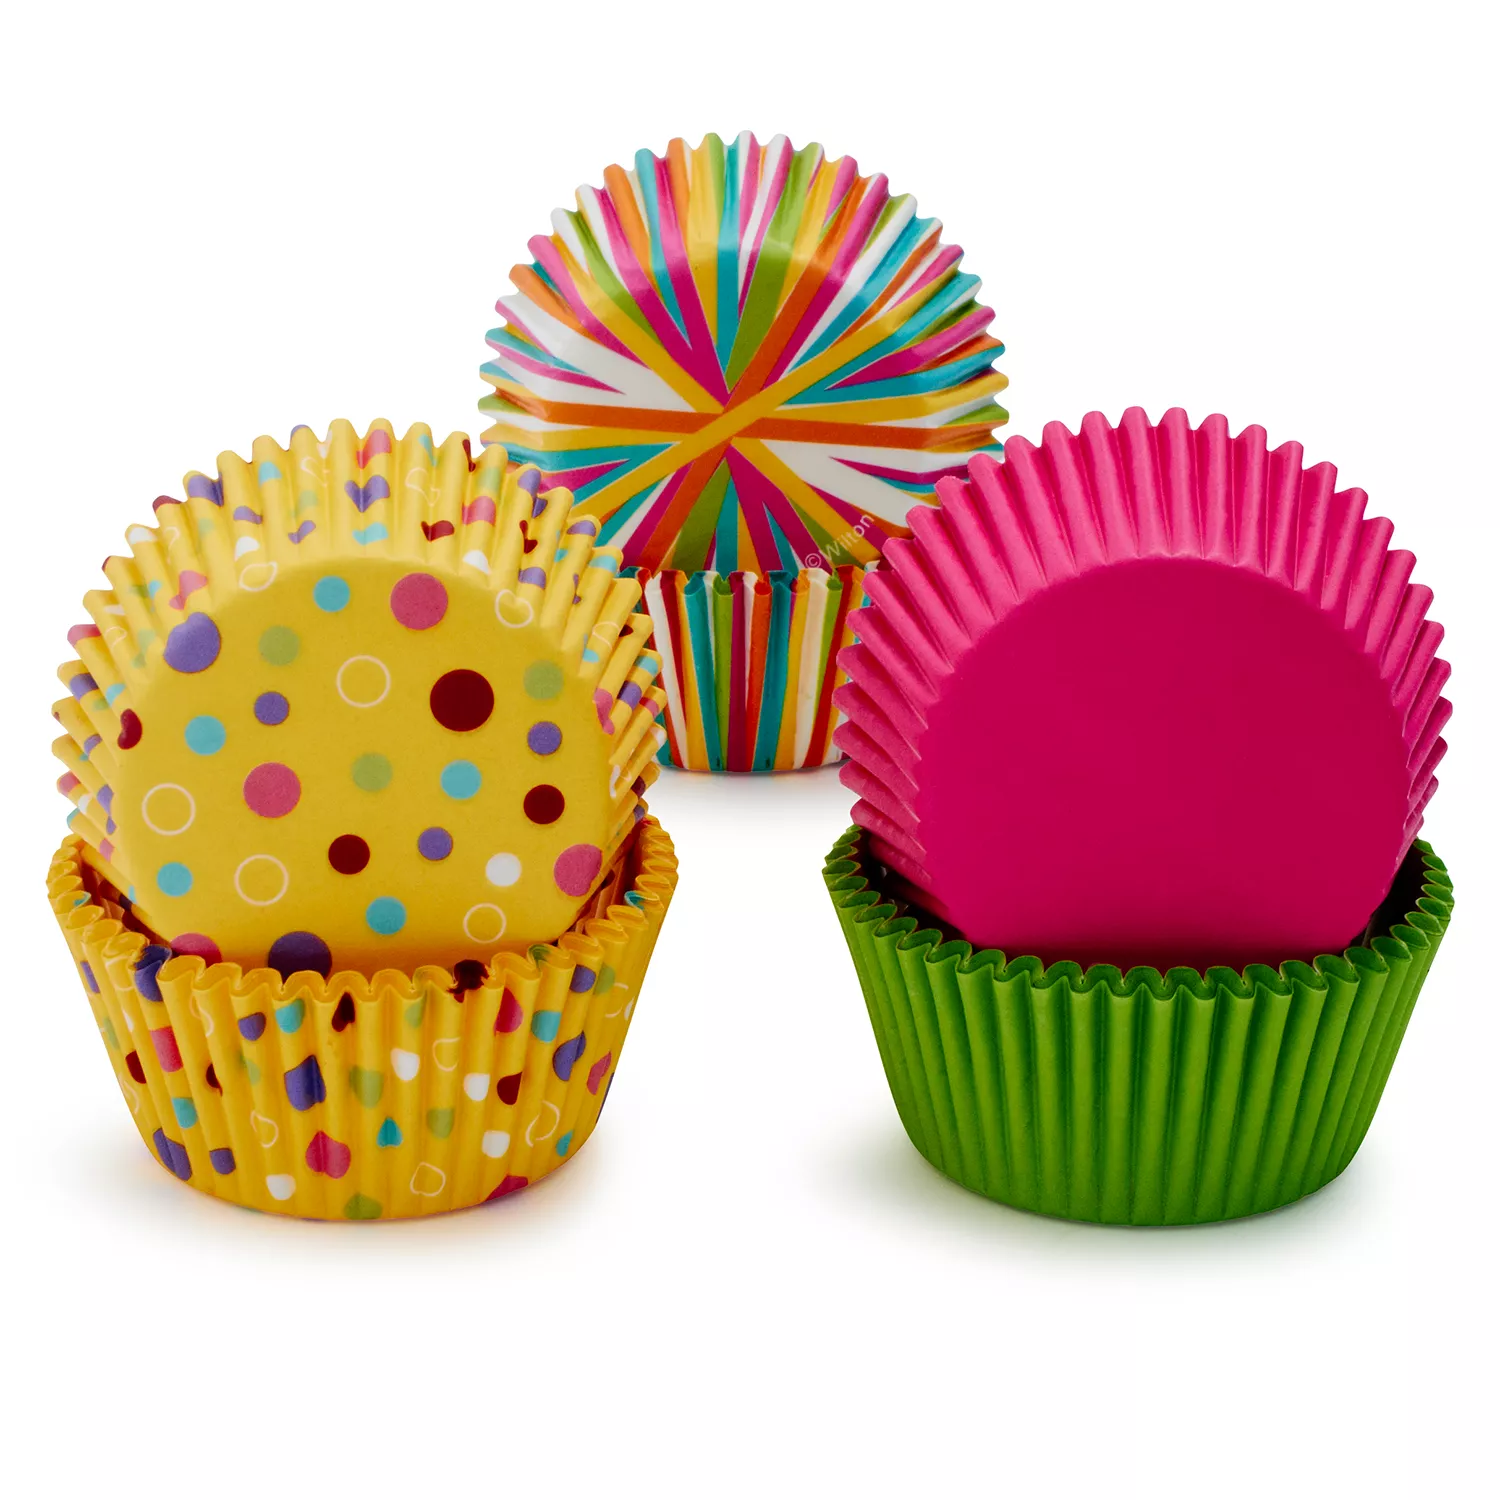 Wilton Dots & Stripes Standard Bake Cups, 150 Count